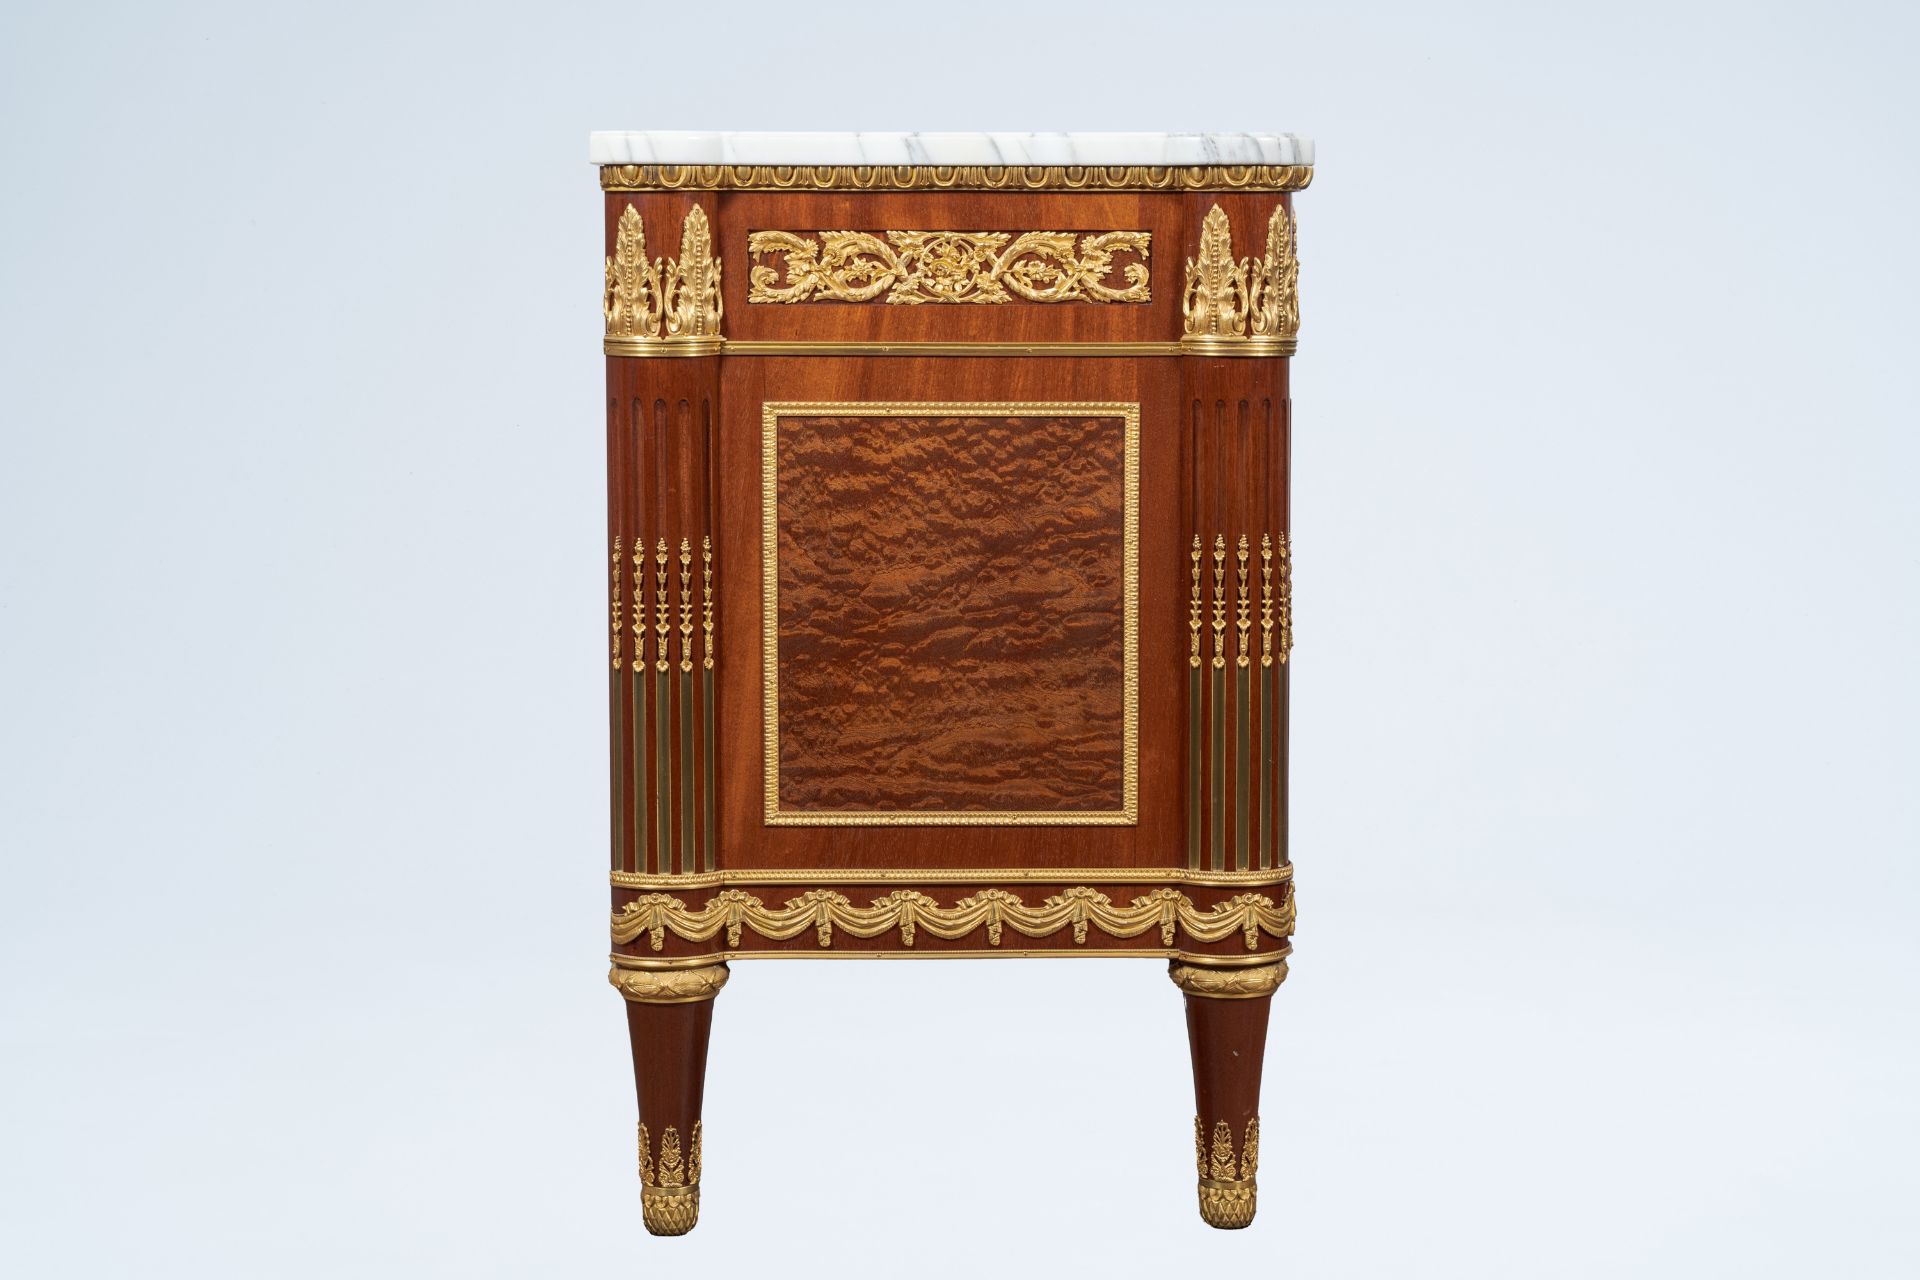 An impressive Neoclassical gilt bronze mounted wood chest of drawers with marble top, 20th C. - Image 7 of 10